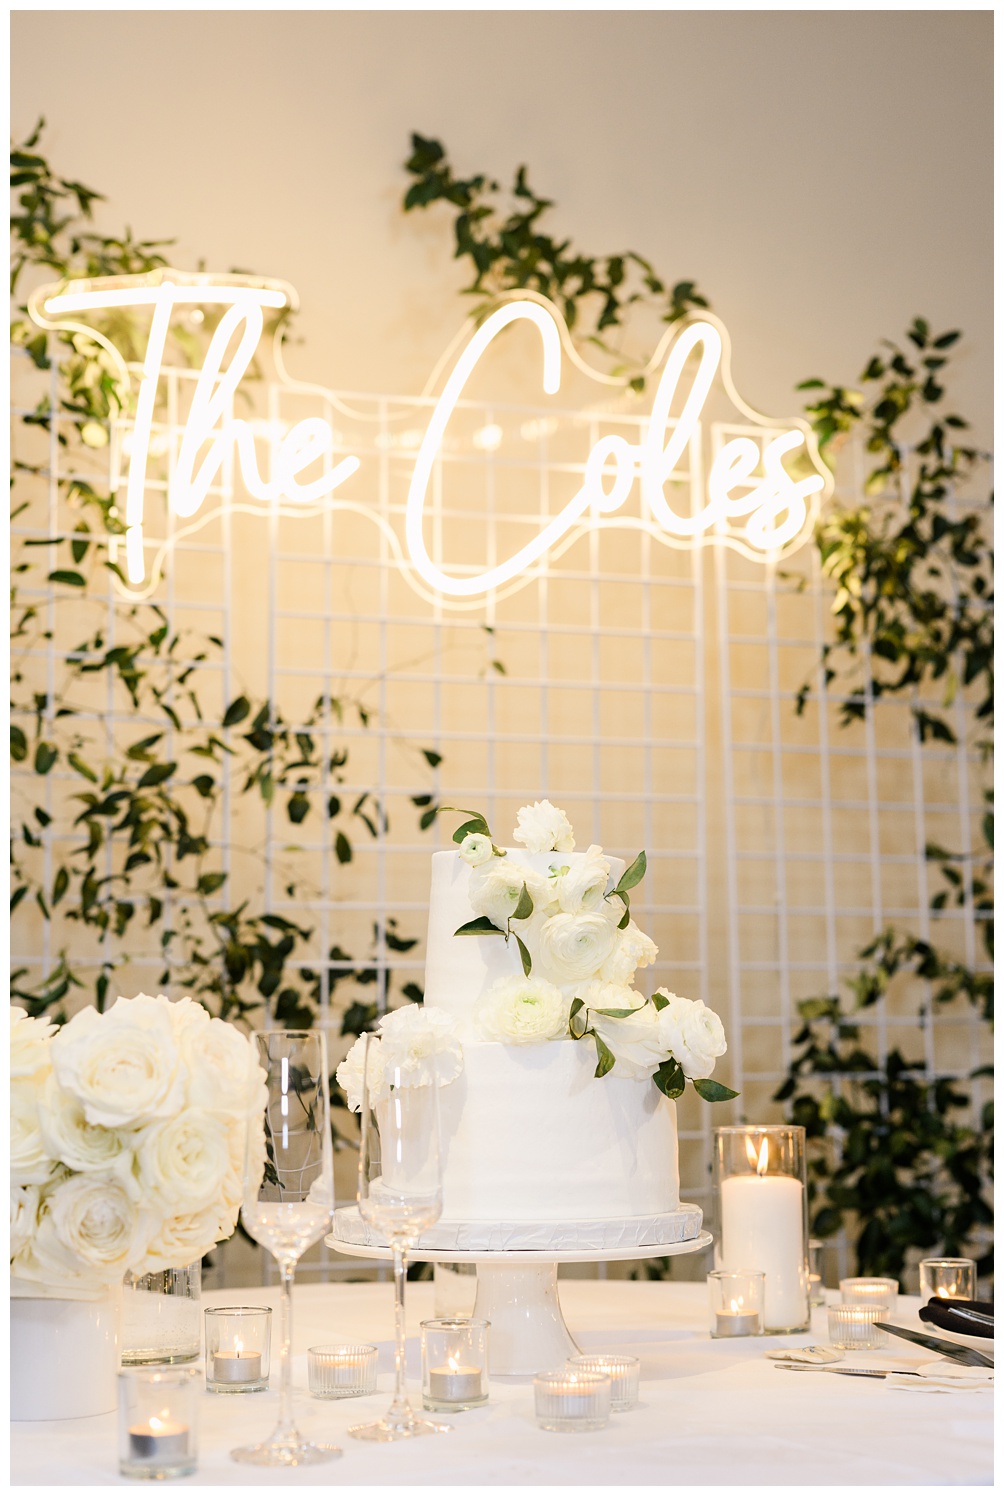 Wedding cake with neon sign of new last name behind it